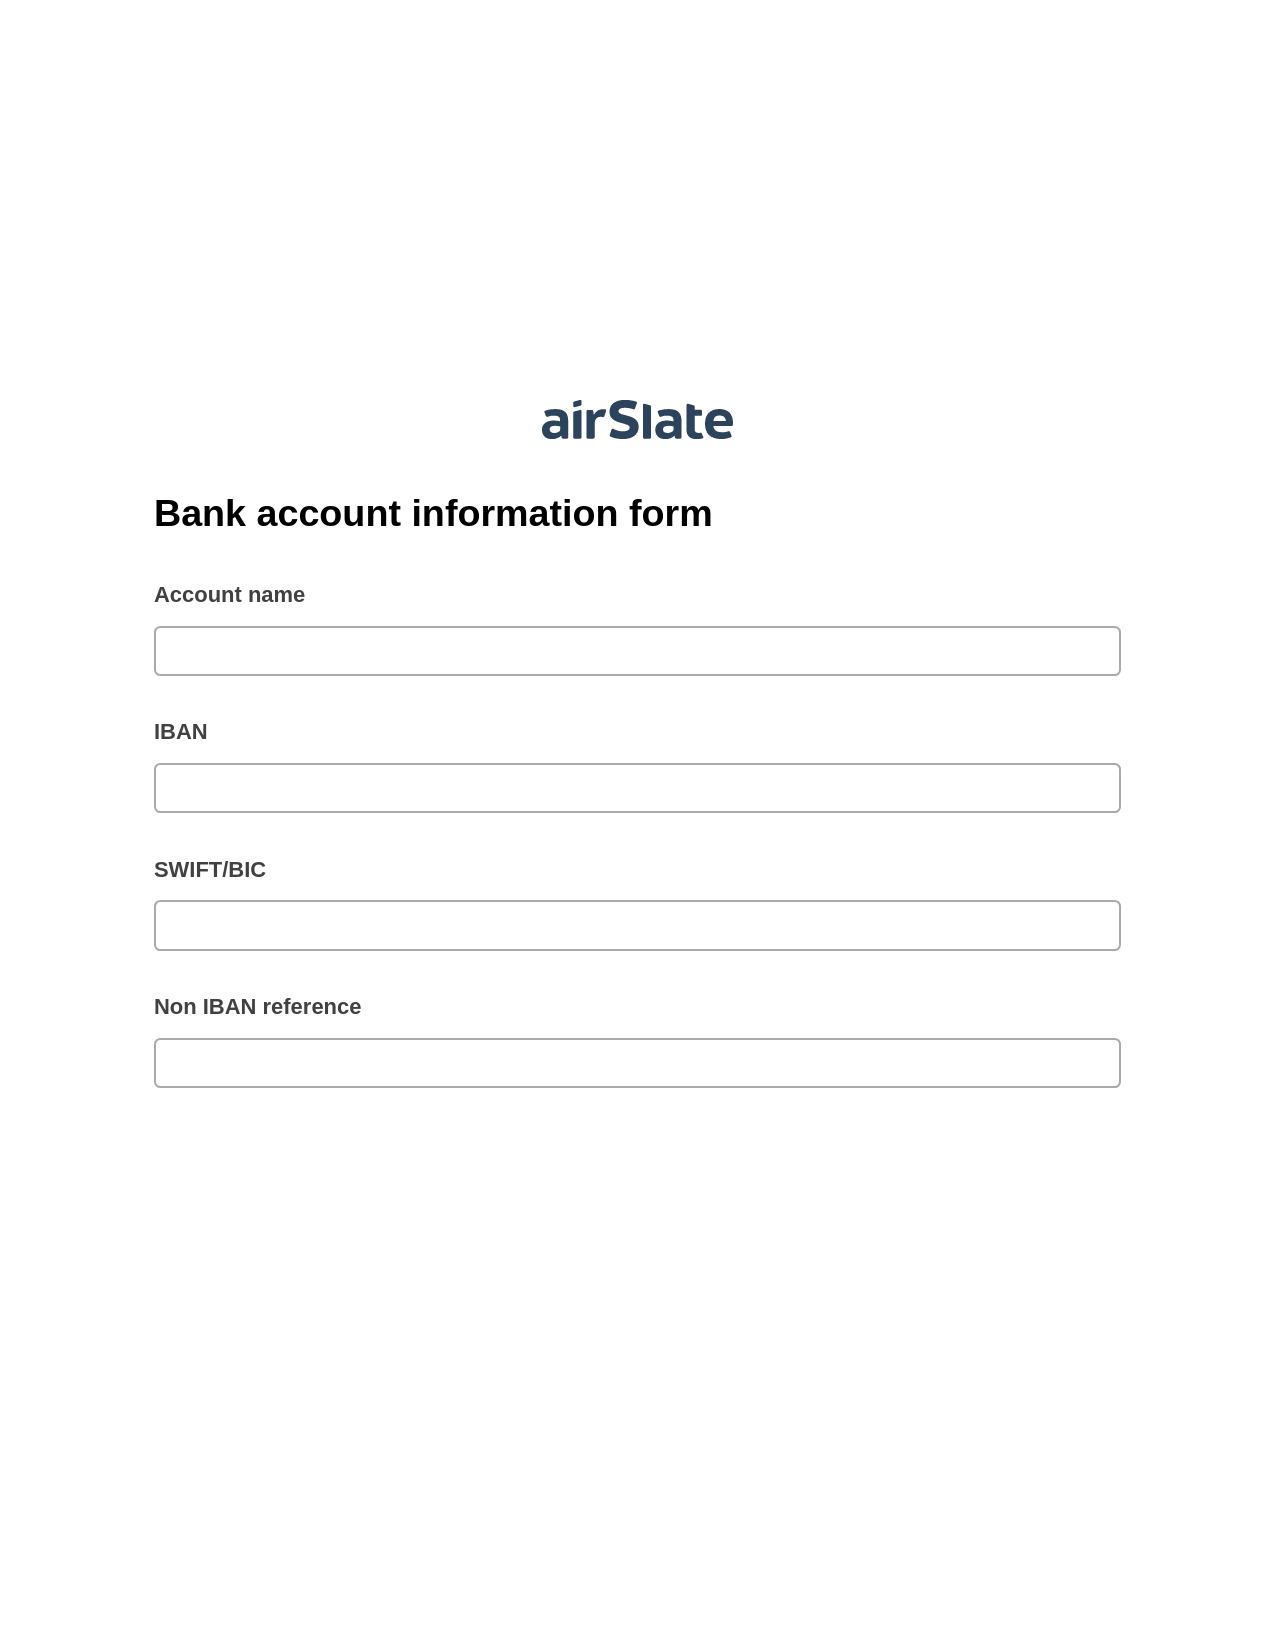 Bank account information form Pre-fill from Google Sheet Dropdown Options Bot, Send a Slate with Roles Bot, Google Drive Bot